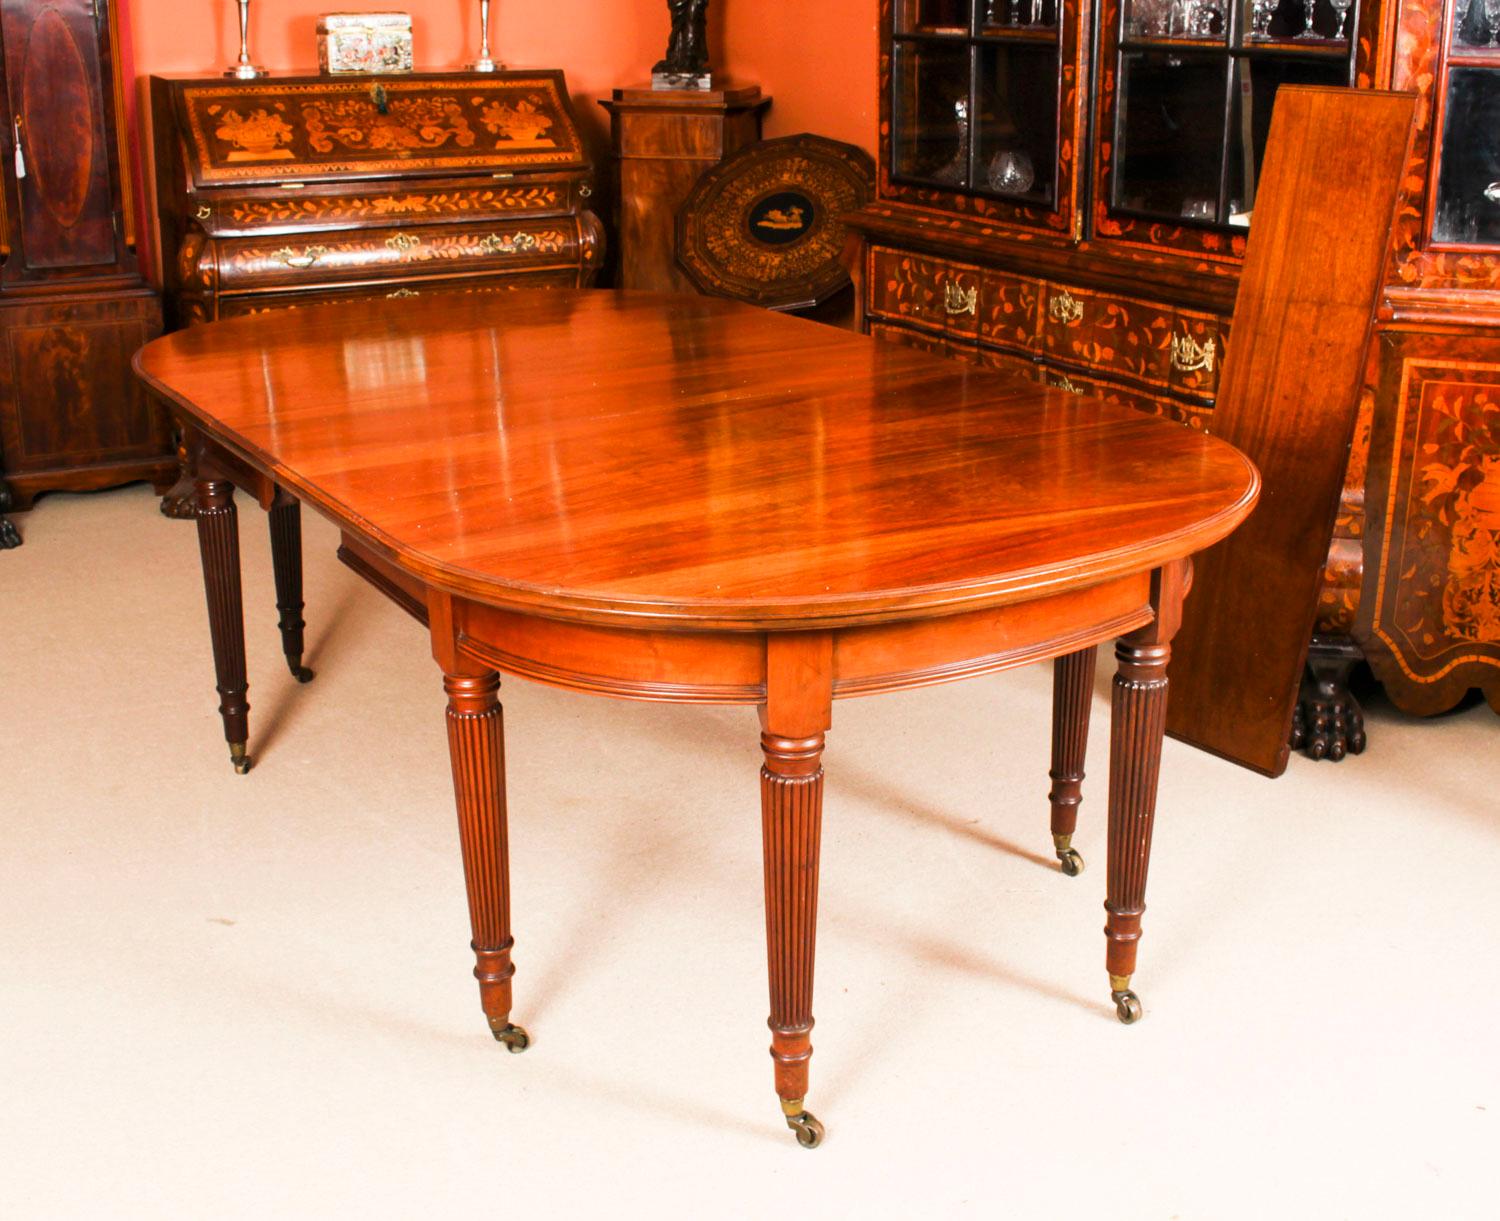 Late 19th Century Antique Victorian Oval Extending Dining Table & 6 Chairs, 19th Century